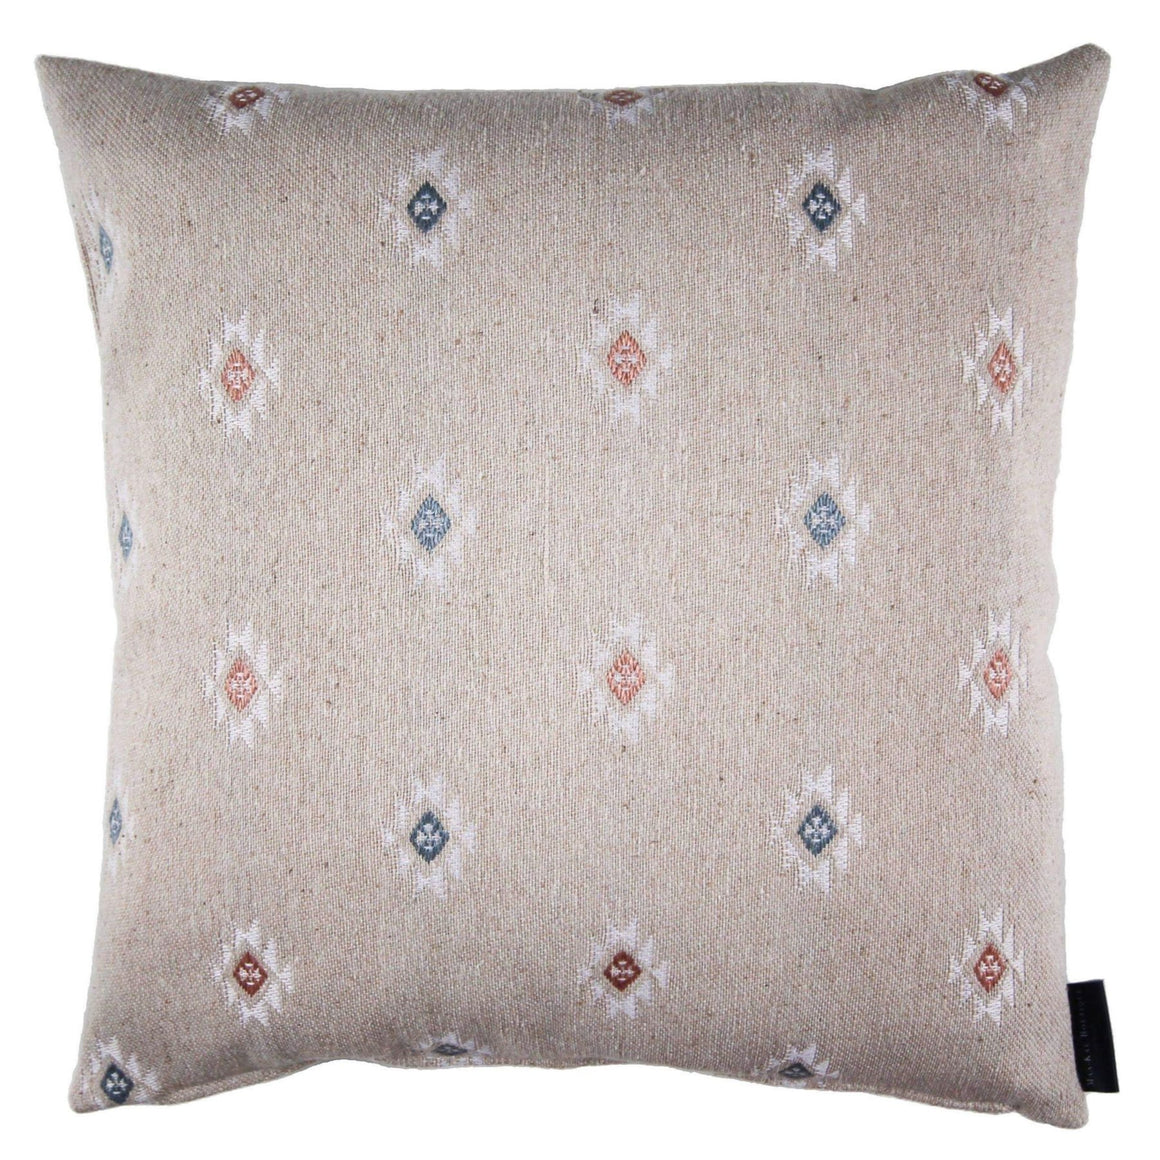 Louise - Light Beige with Losange Motifs Pillow Cover - 18x18